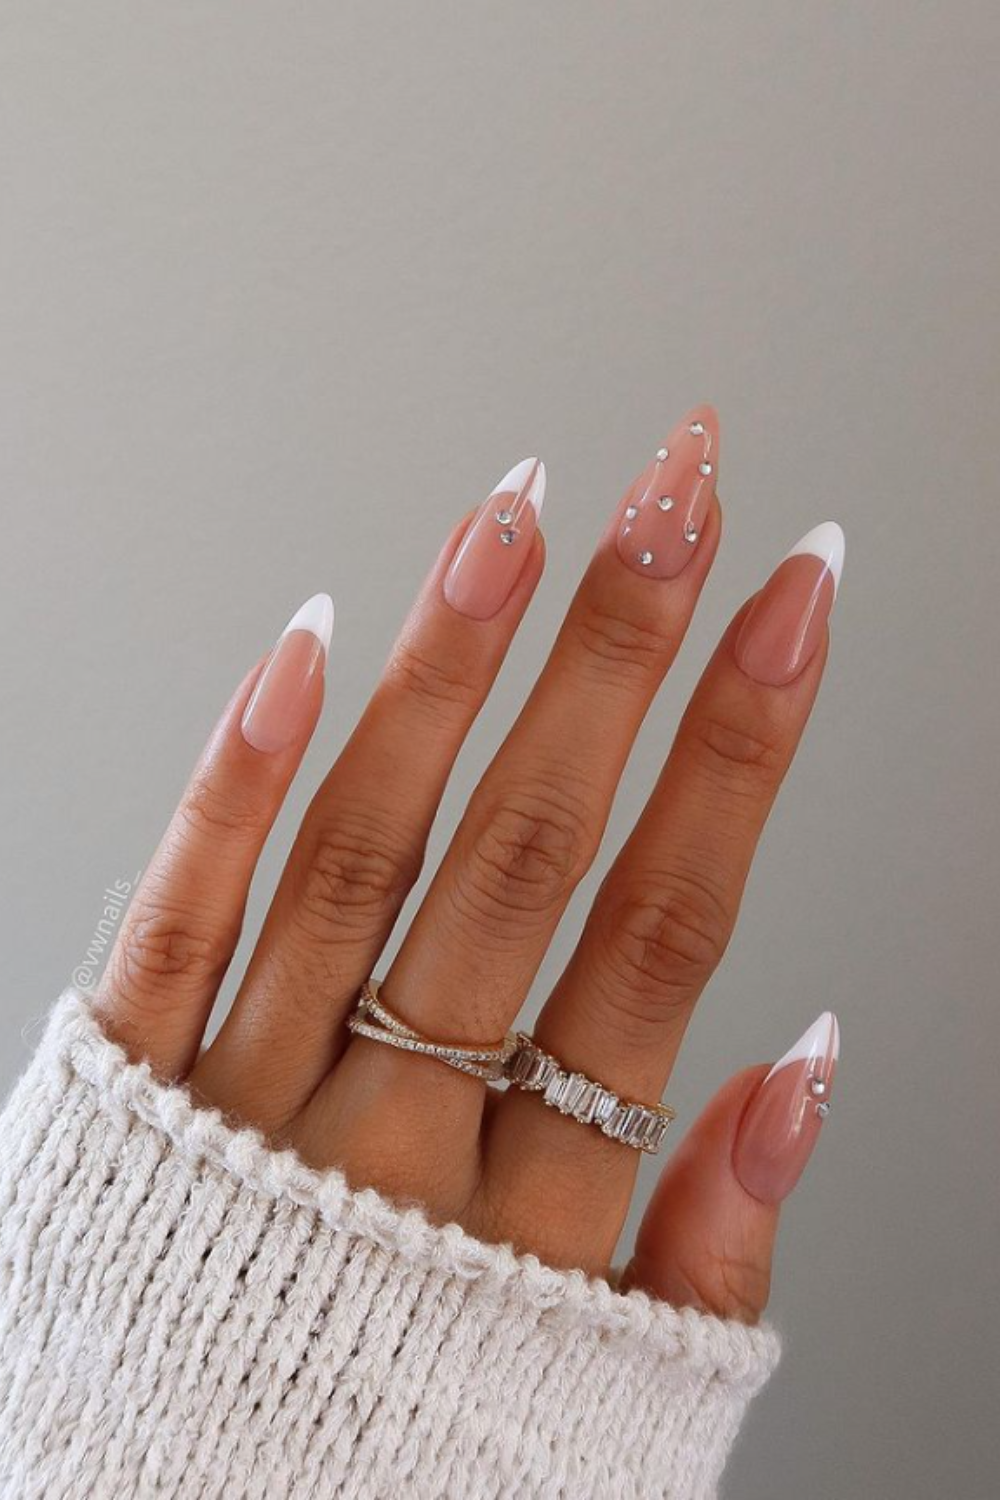 Frenchtipnails 